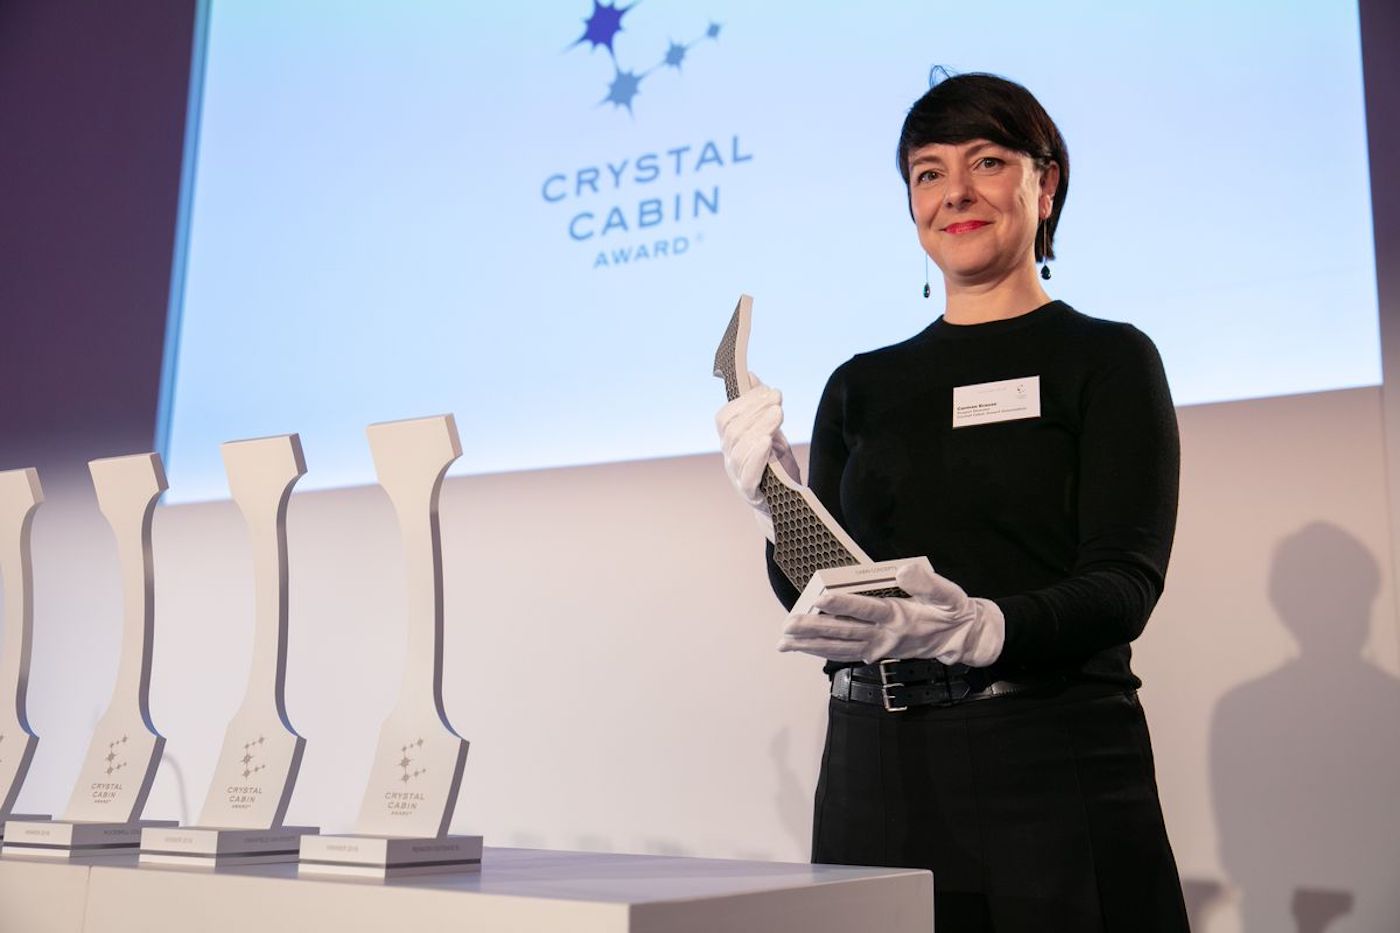 Carmen Krause is project director of the Crystal Cabin Awards holding a trophy